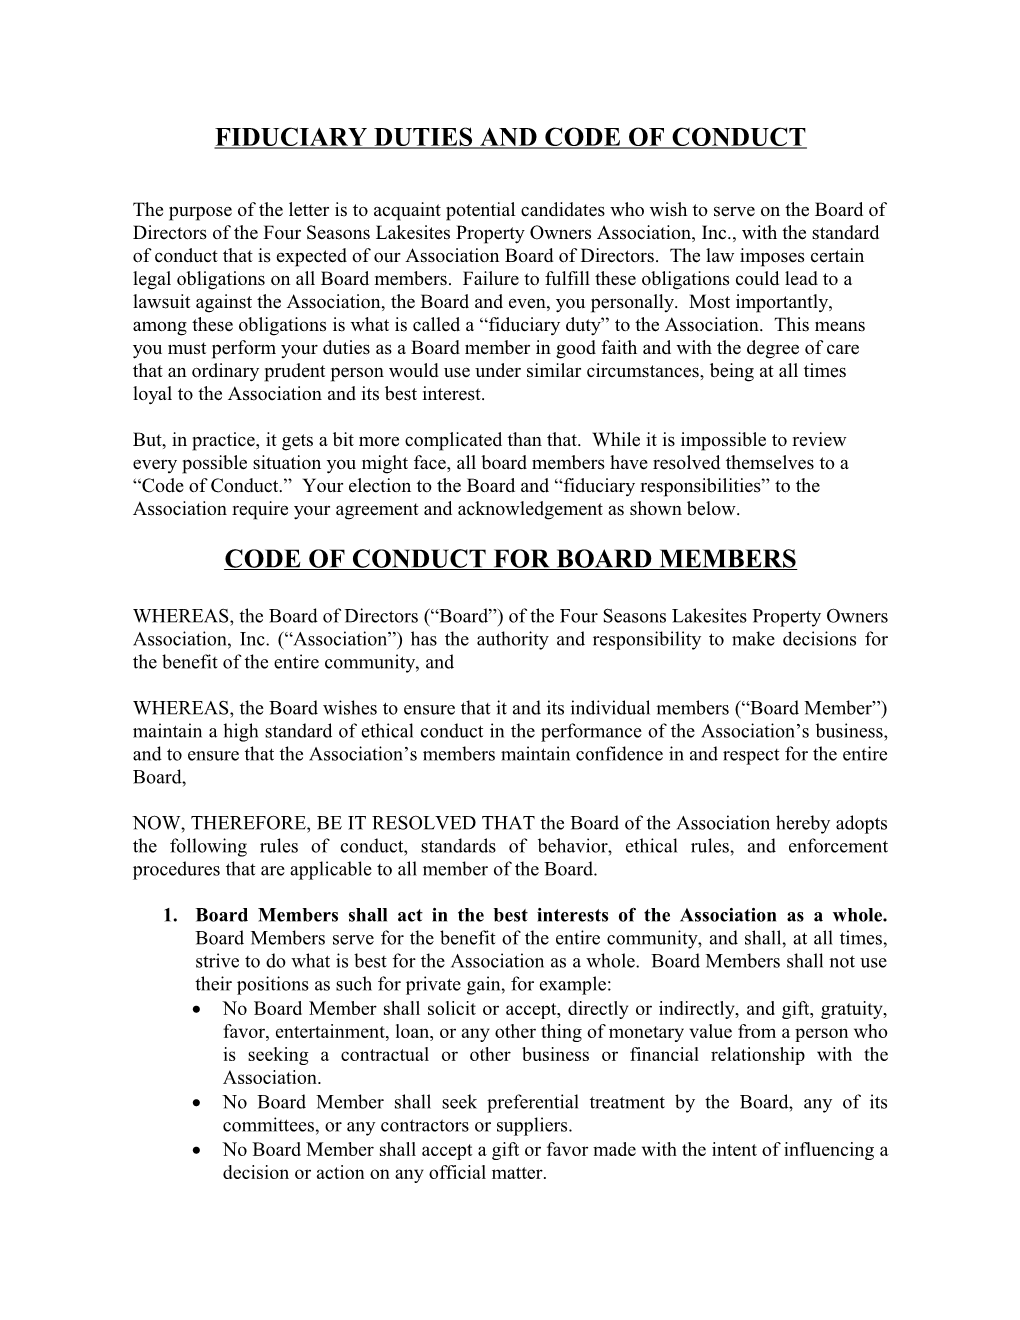 Code of Conduct for Board Members